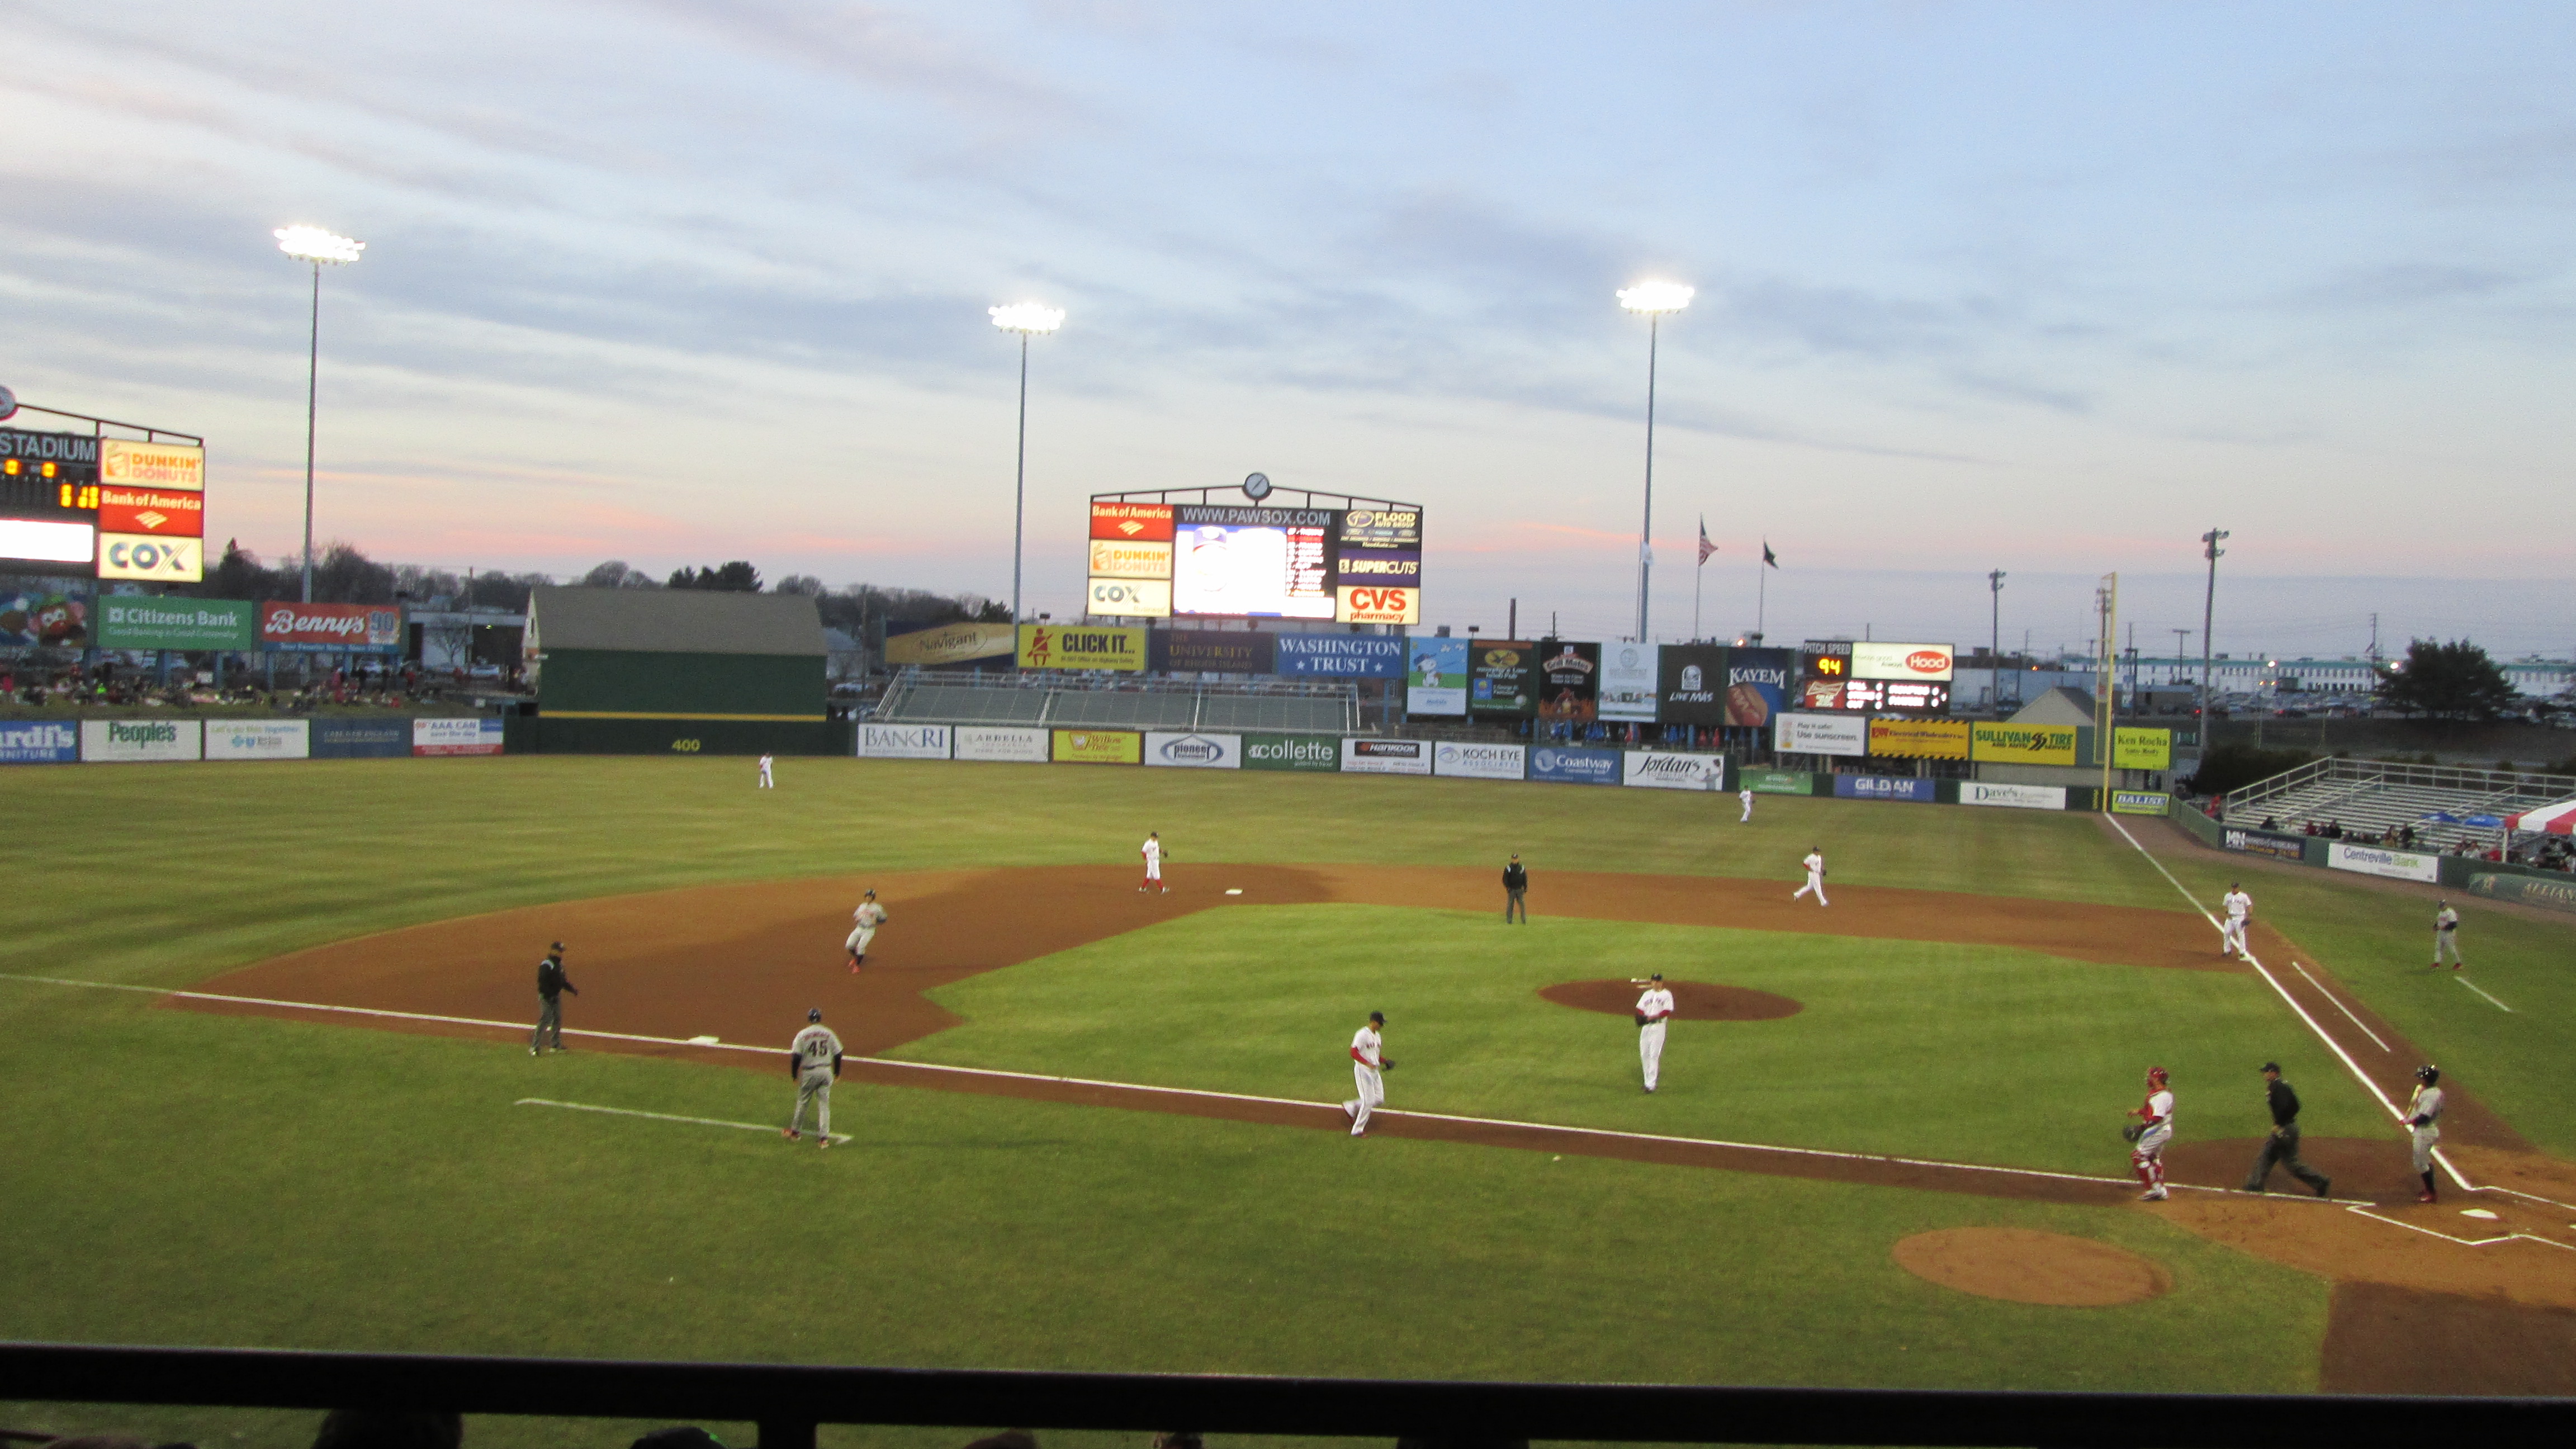 Worcester and the Pawtucket Red Sox